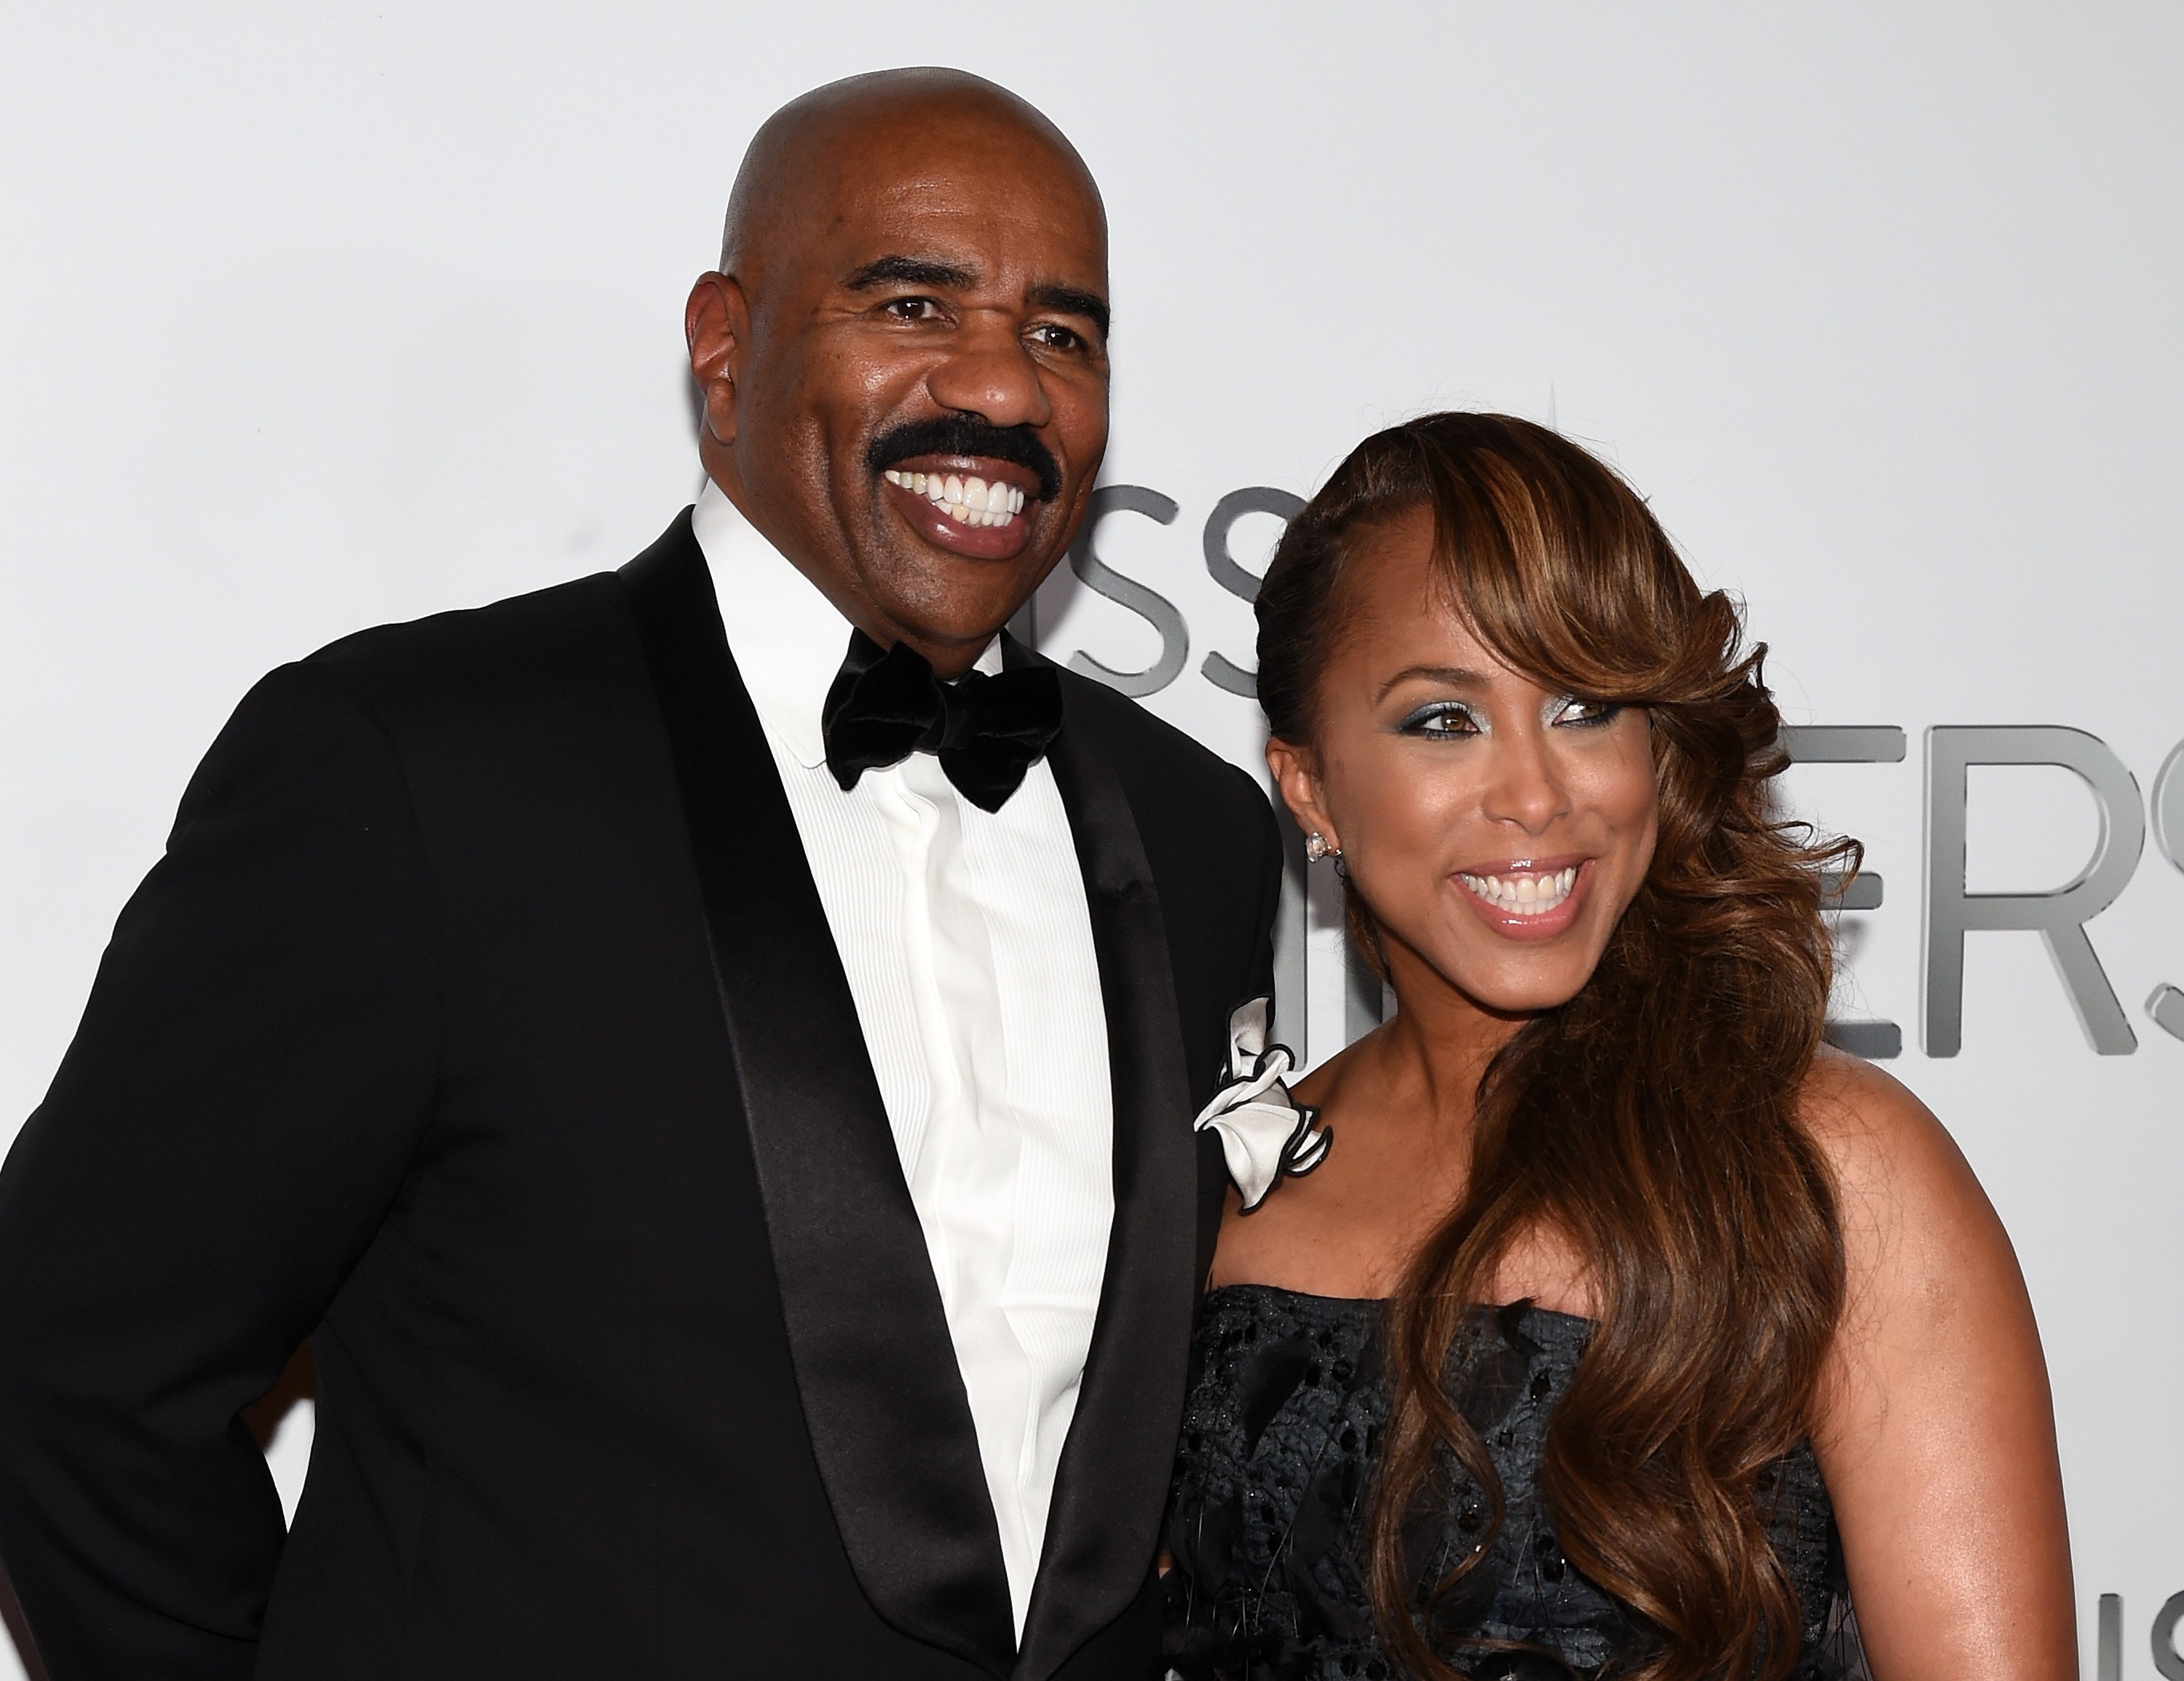  Steve and Marjorie Harvey at the 2015 Miss Universe Pageant on December 20, 2015 in Las Vegas, Nevada. | Source: Getty Images